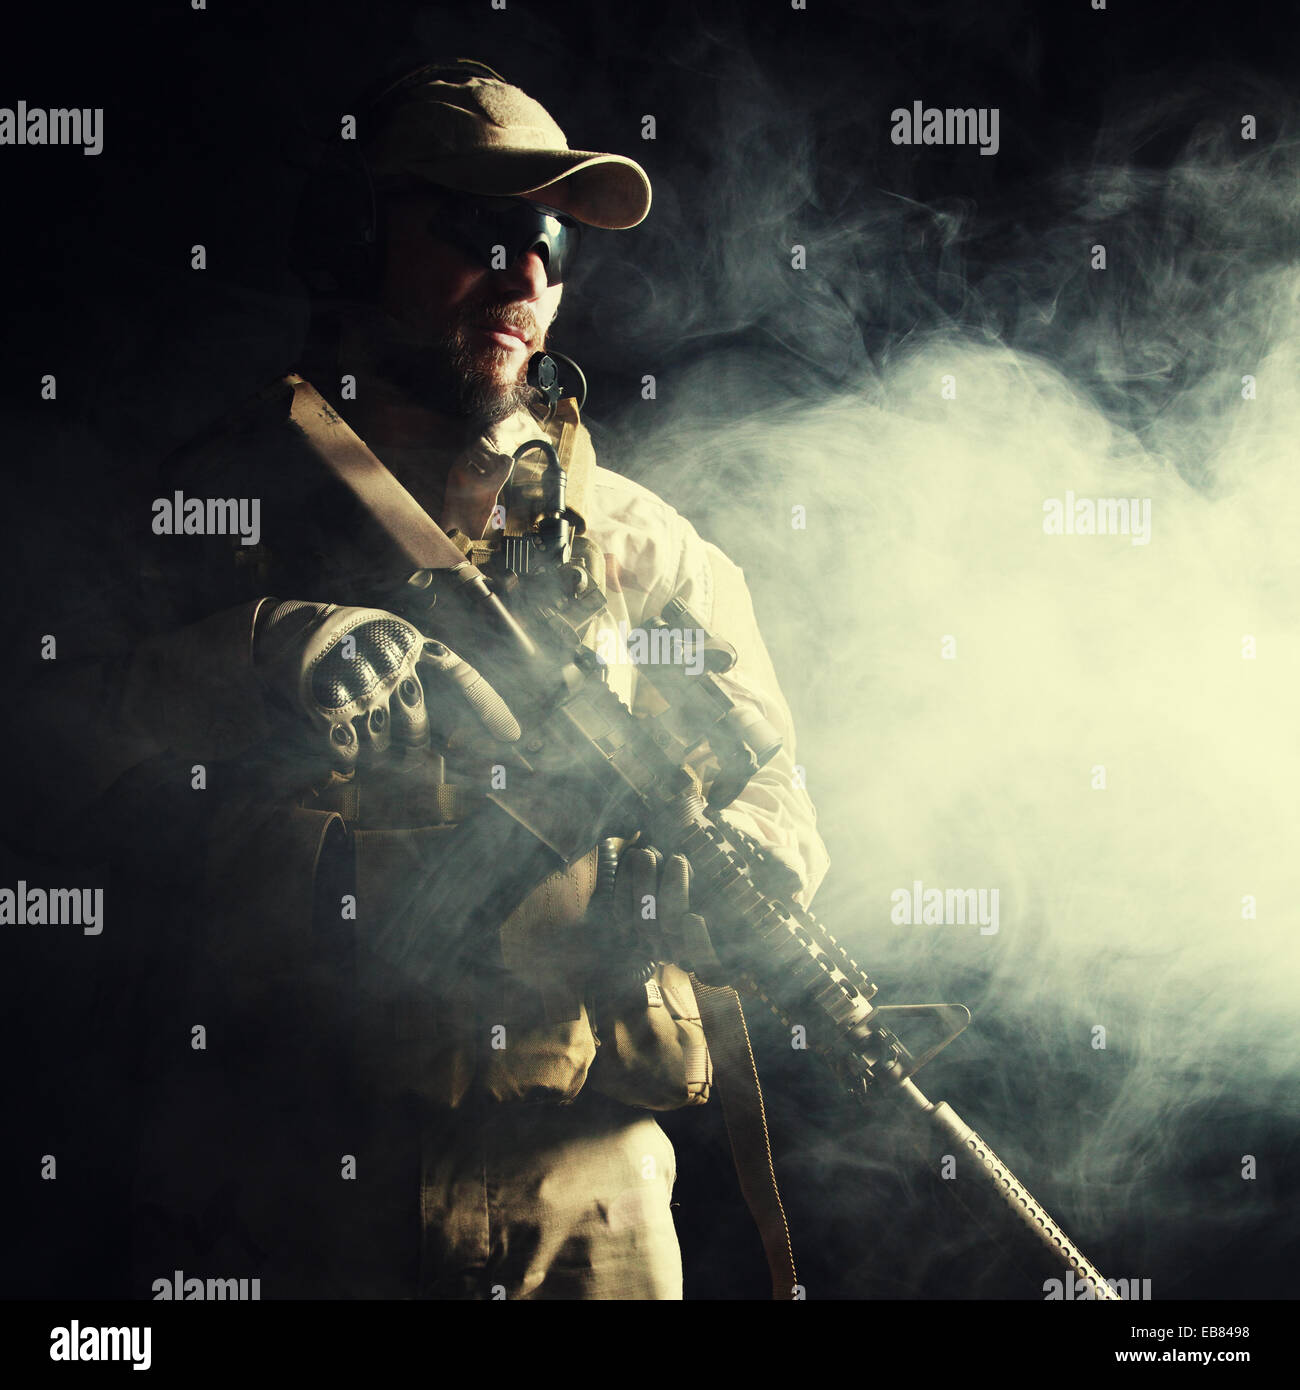 Bearded special forces soldier Stock Photo